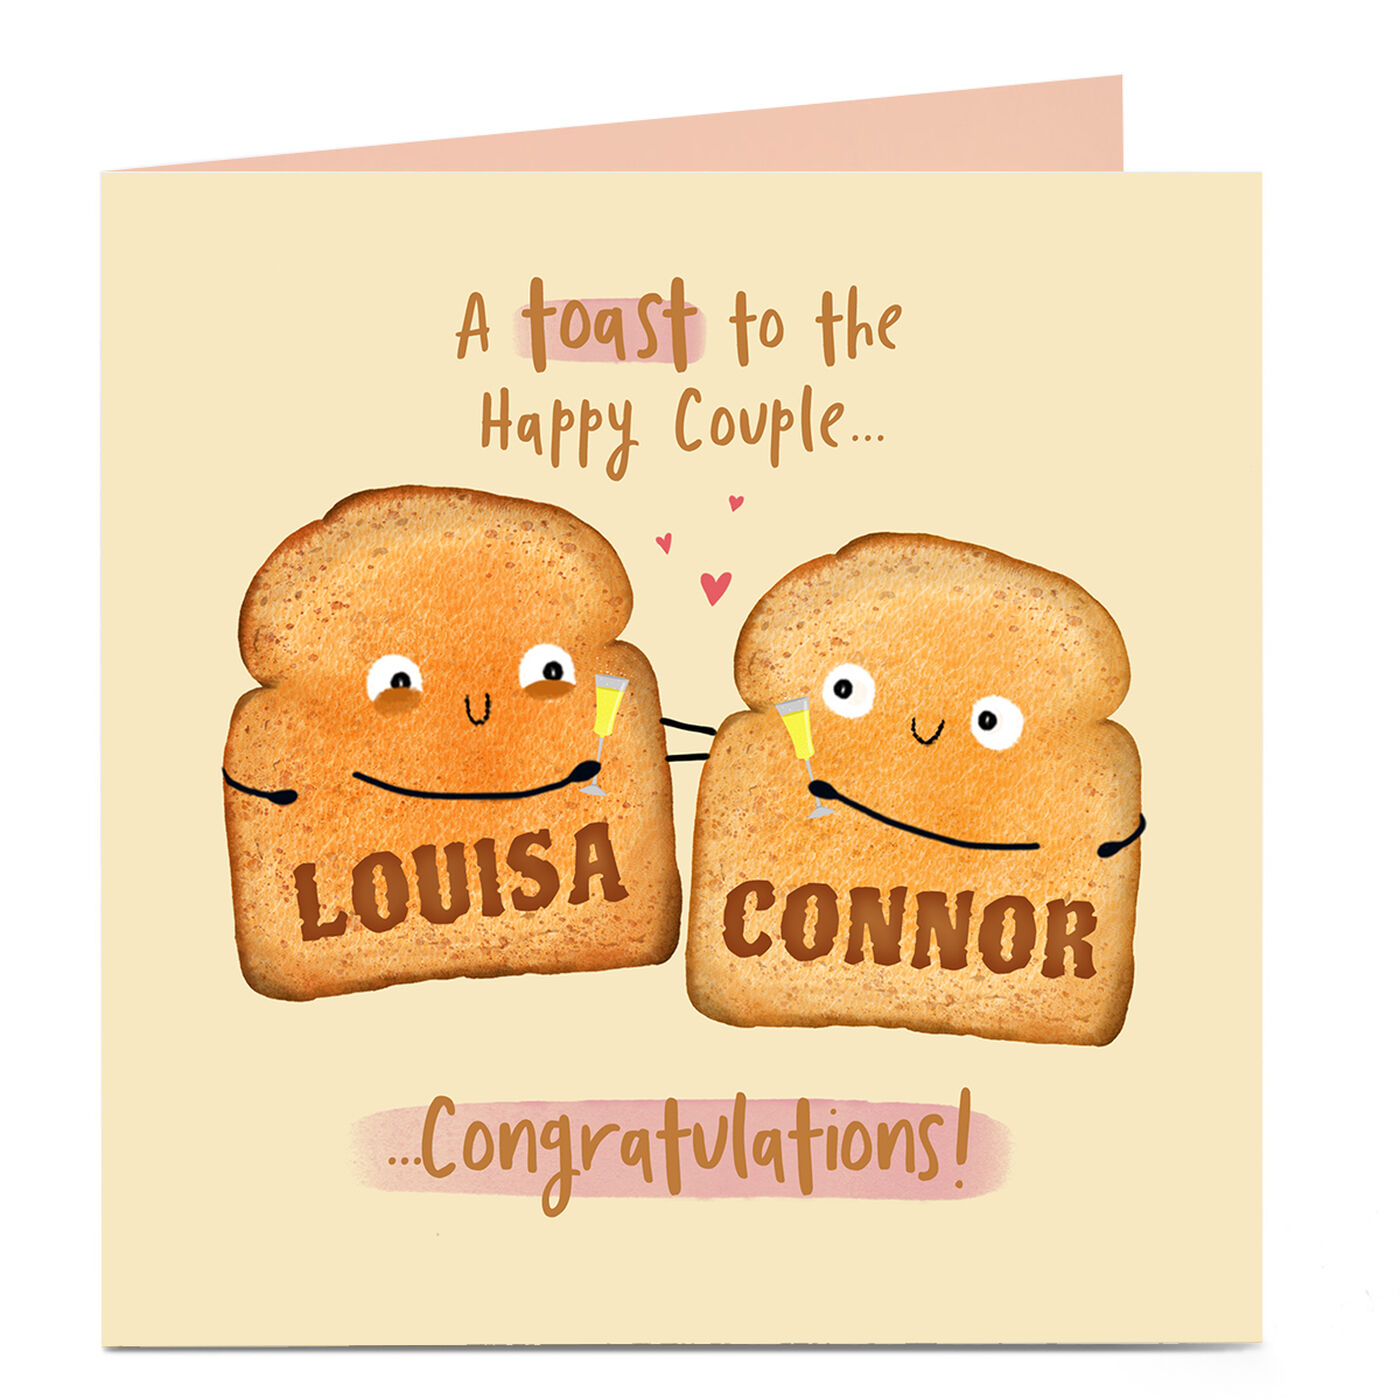 buy-personalised-wedding-card-toast-to-the-happy-couple-for-gbp-2-79